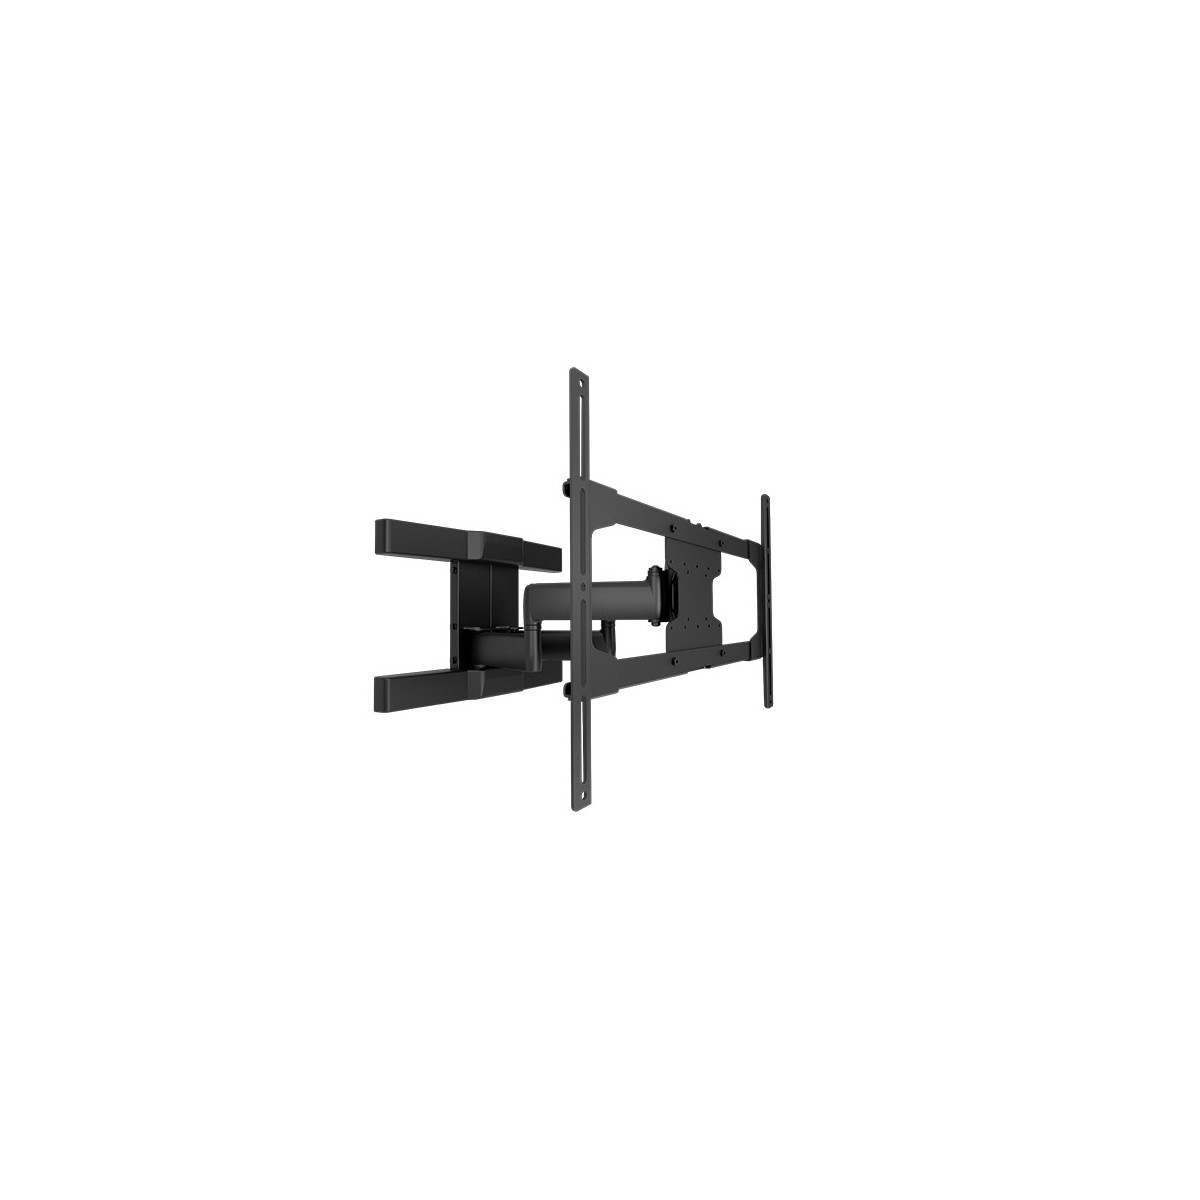 Chief Articulating Outdoor Wall Mount - 68 kg - 81.3 cm (32) - 2.03 m (80) - 75 x 75 mm - 709 x 444 mm - -15 - 15°